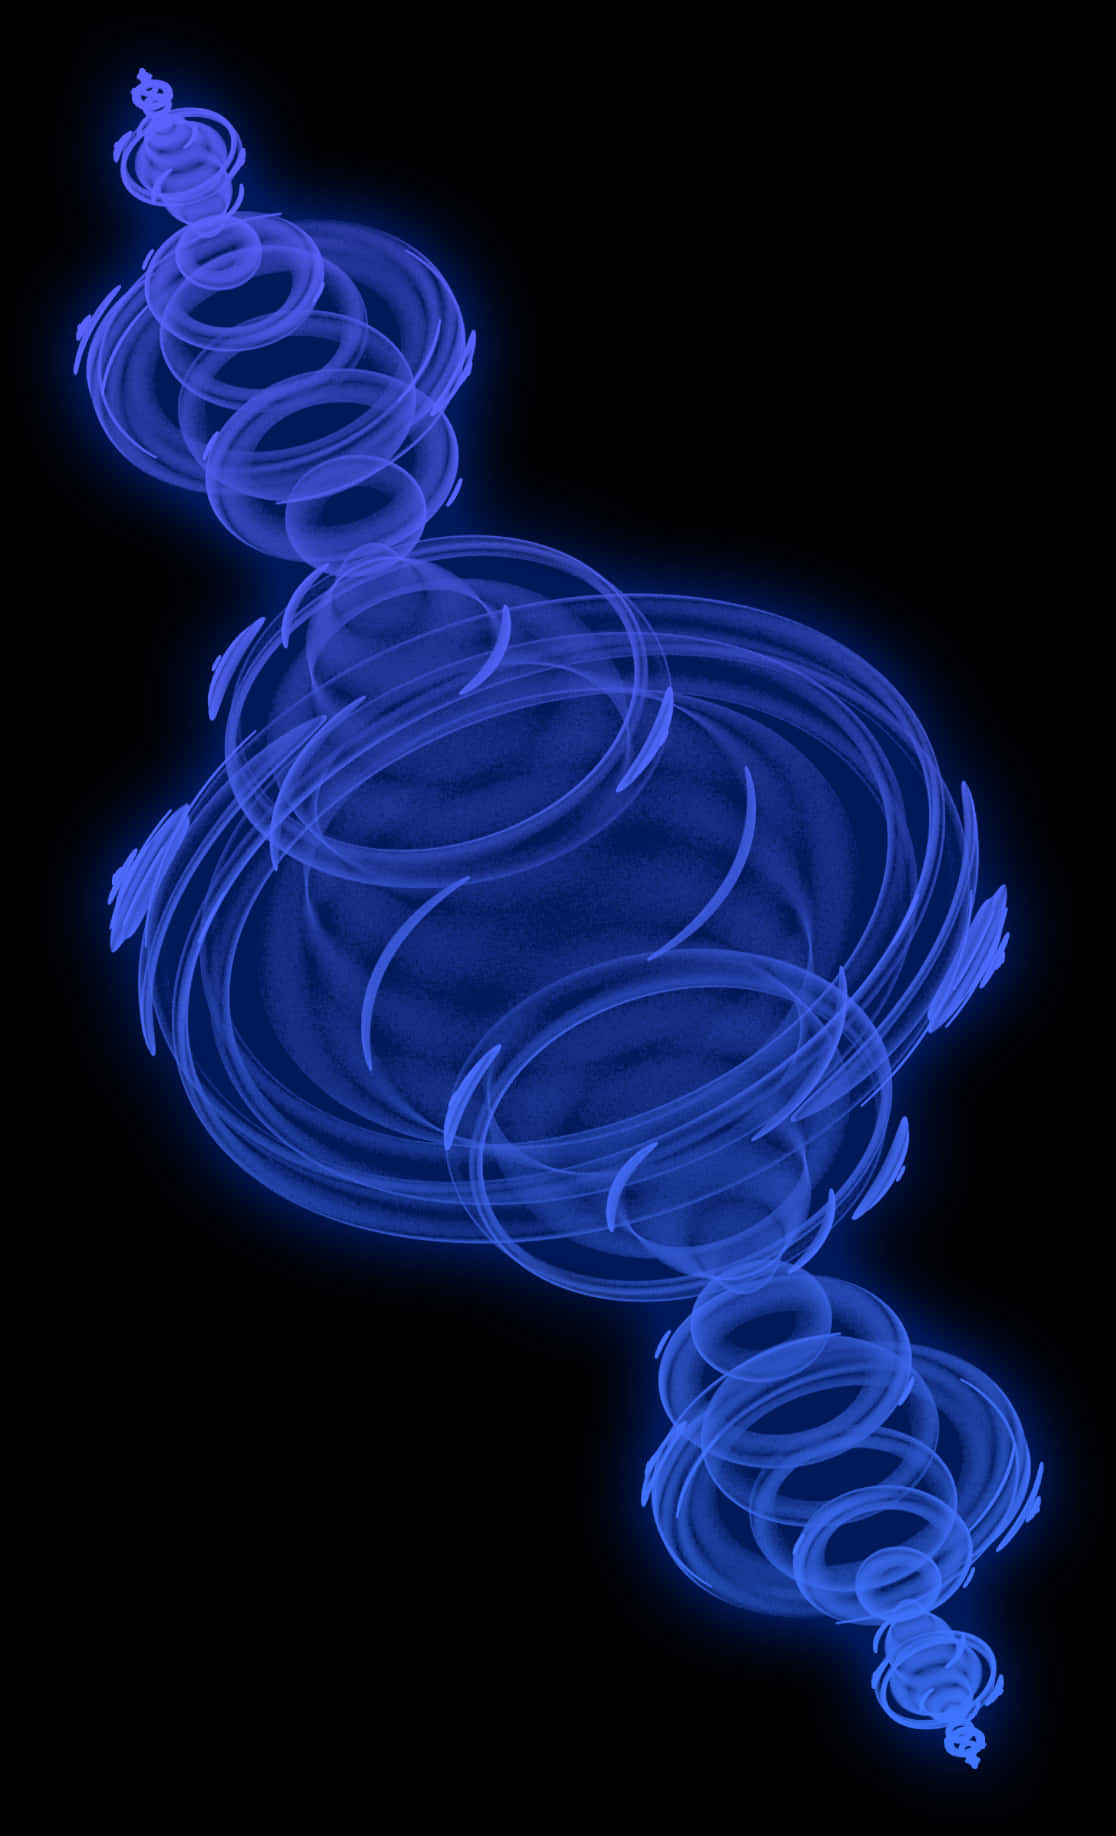 A Blue Light Painting Of Circles